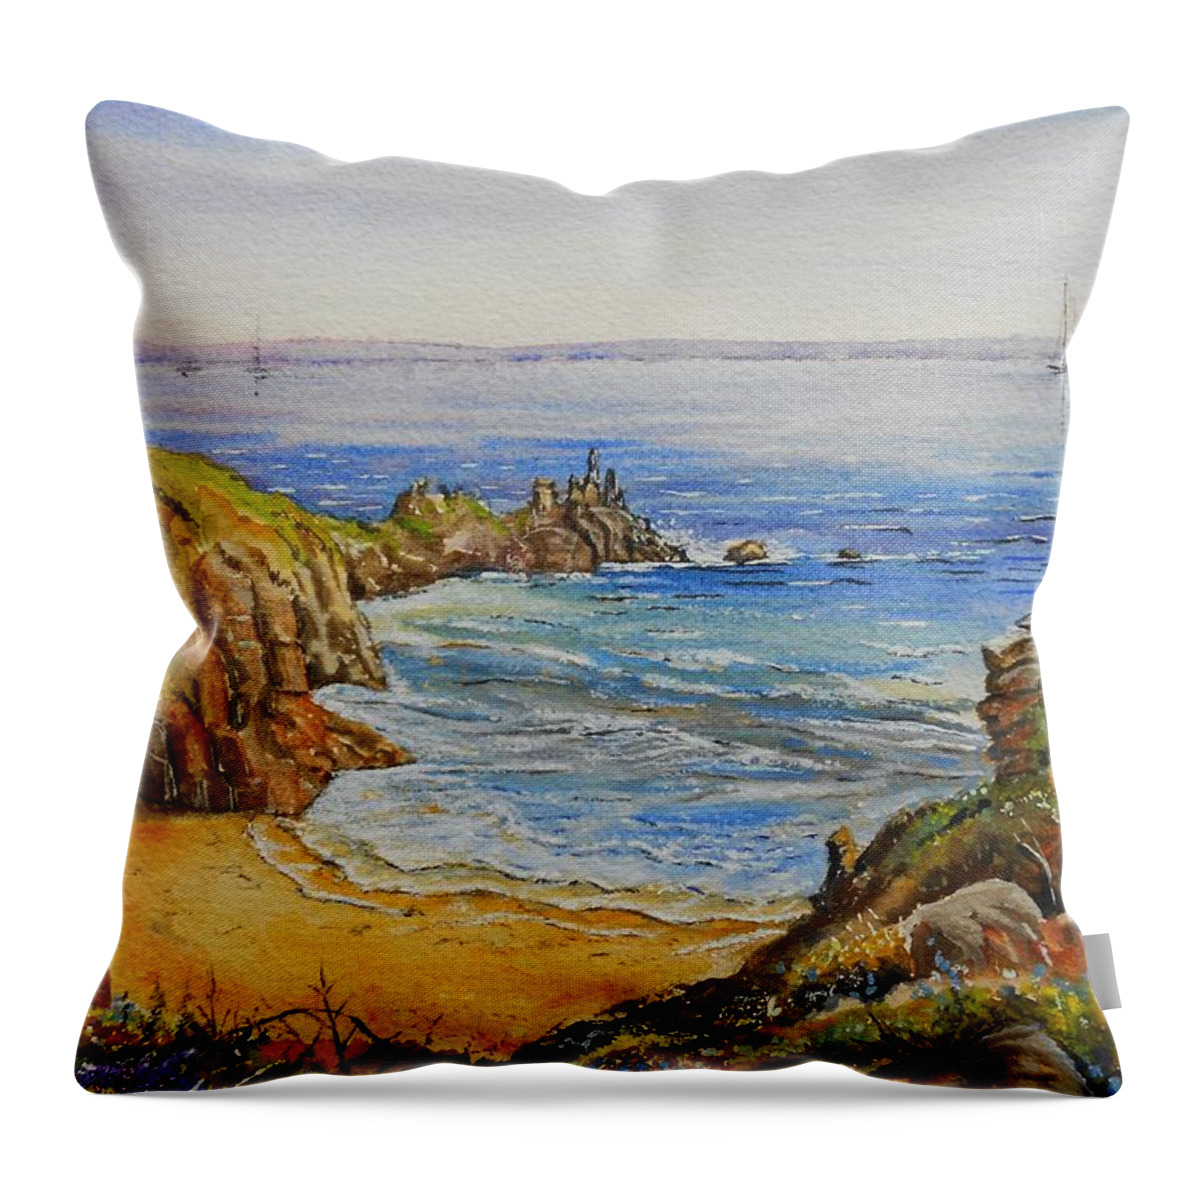 Seascape Throw Pillow featuring the painting Floral Cliffs by Andrew Read